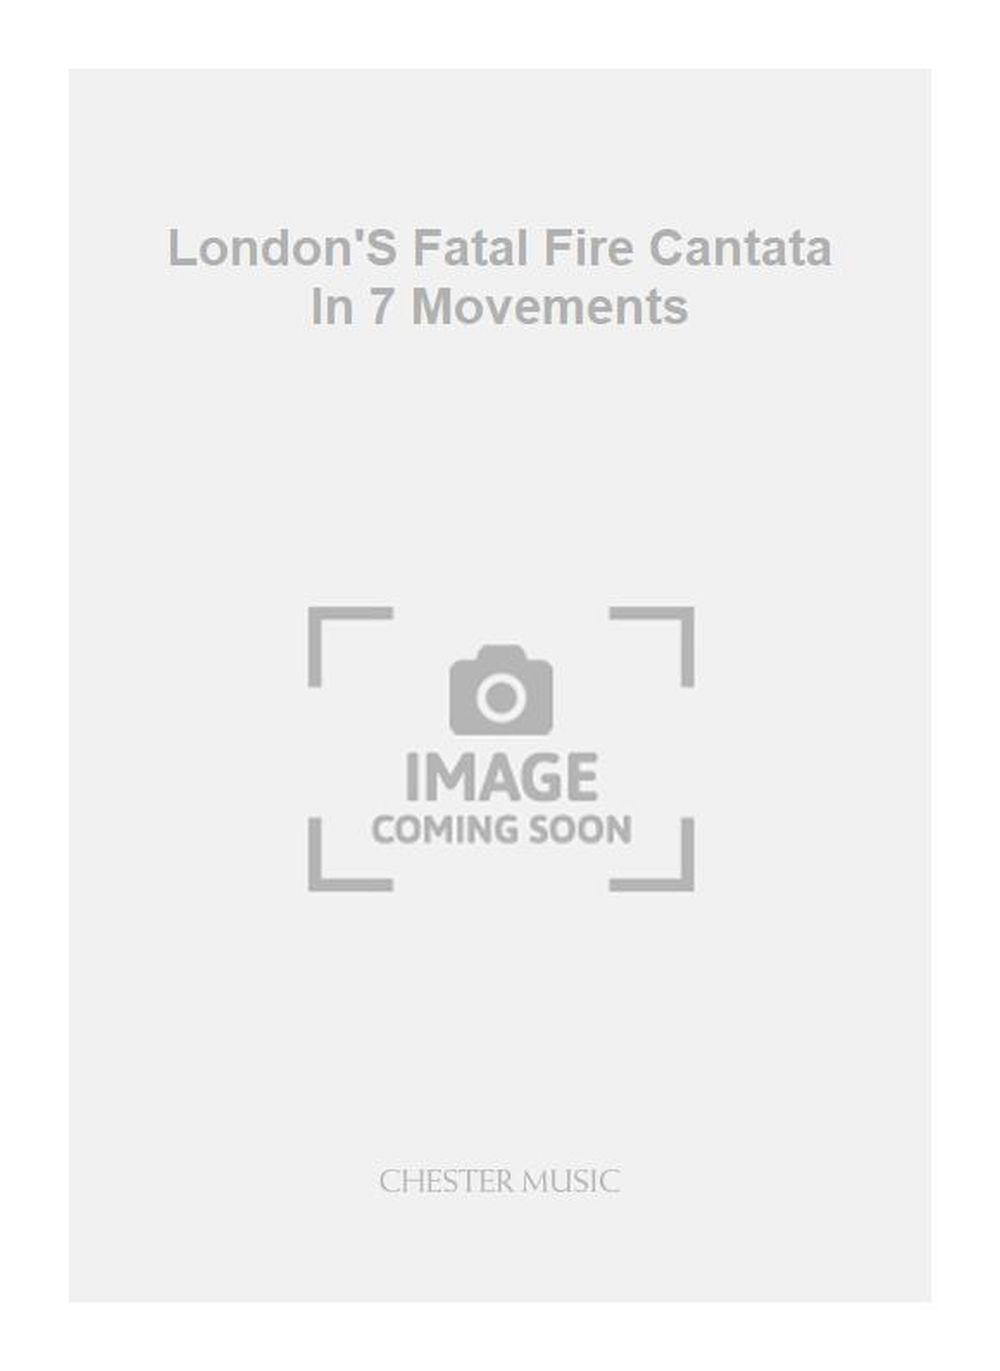 Iain Bell: London's Fatal Fire Cantata In 7 Movements